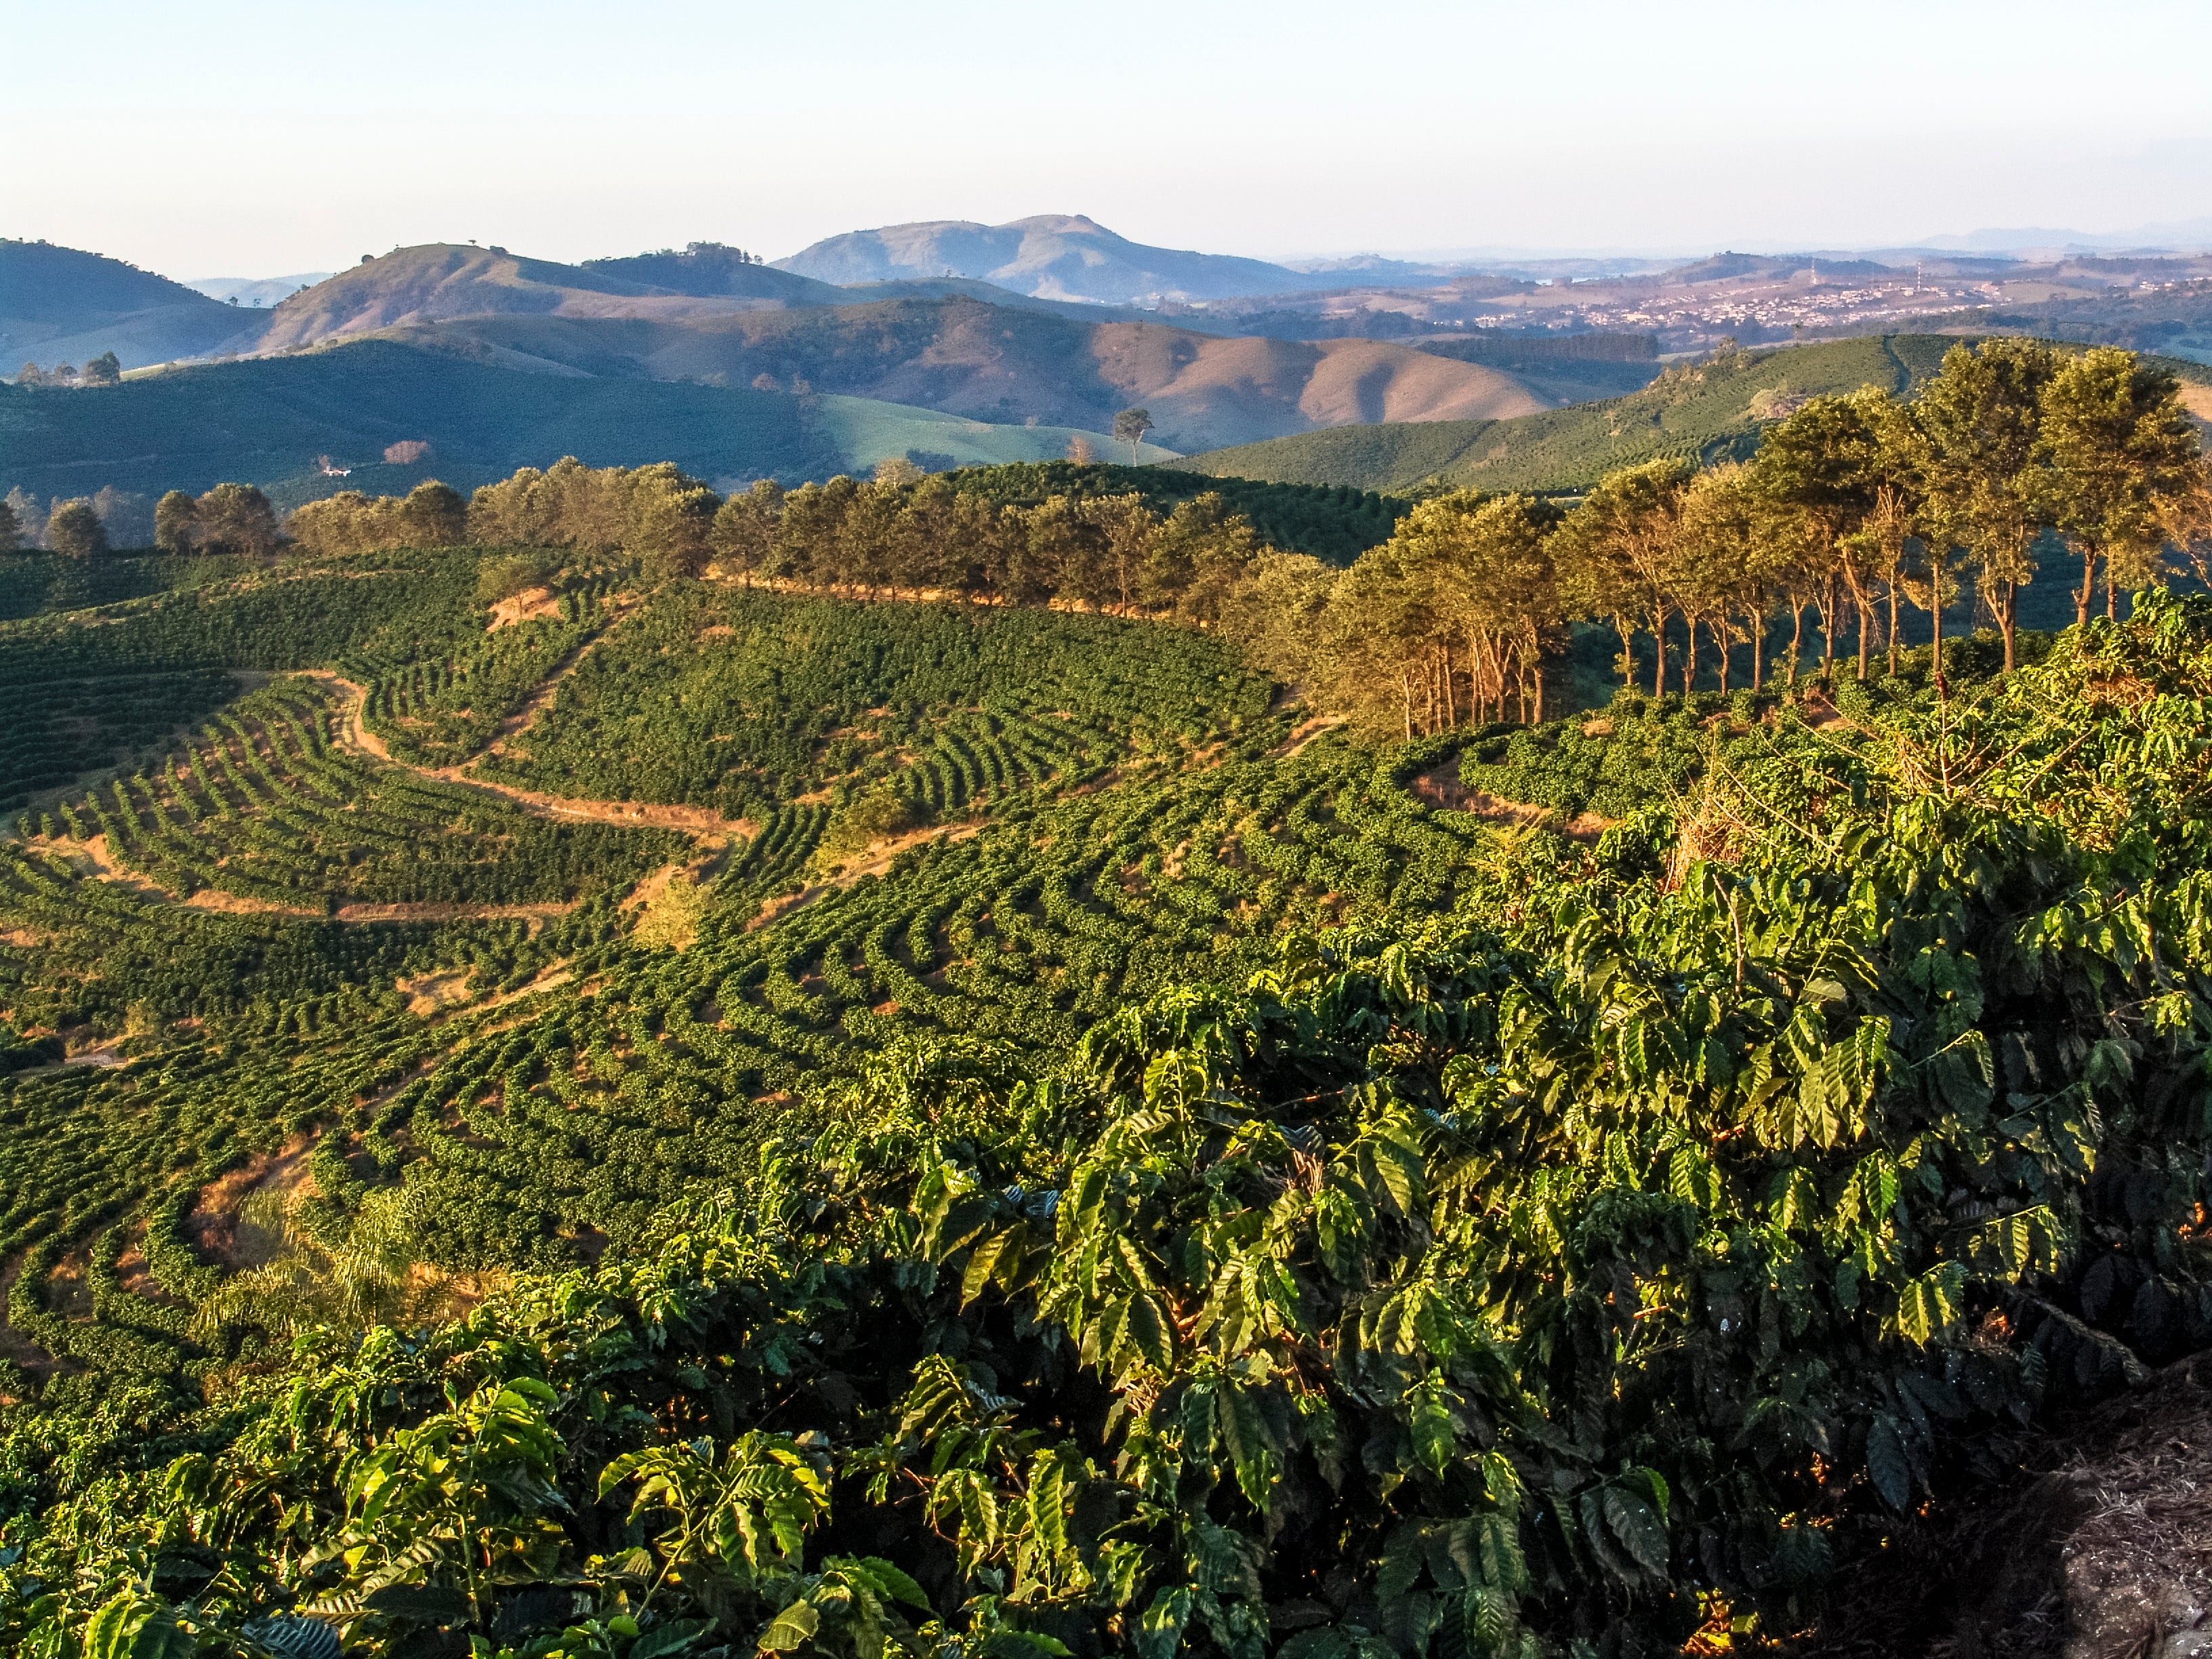 A coffee plantation in Minas Gerais, Brazil. The country produces around 40% of the world’s coffee supply